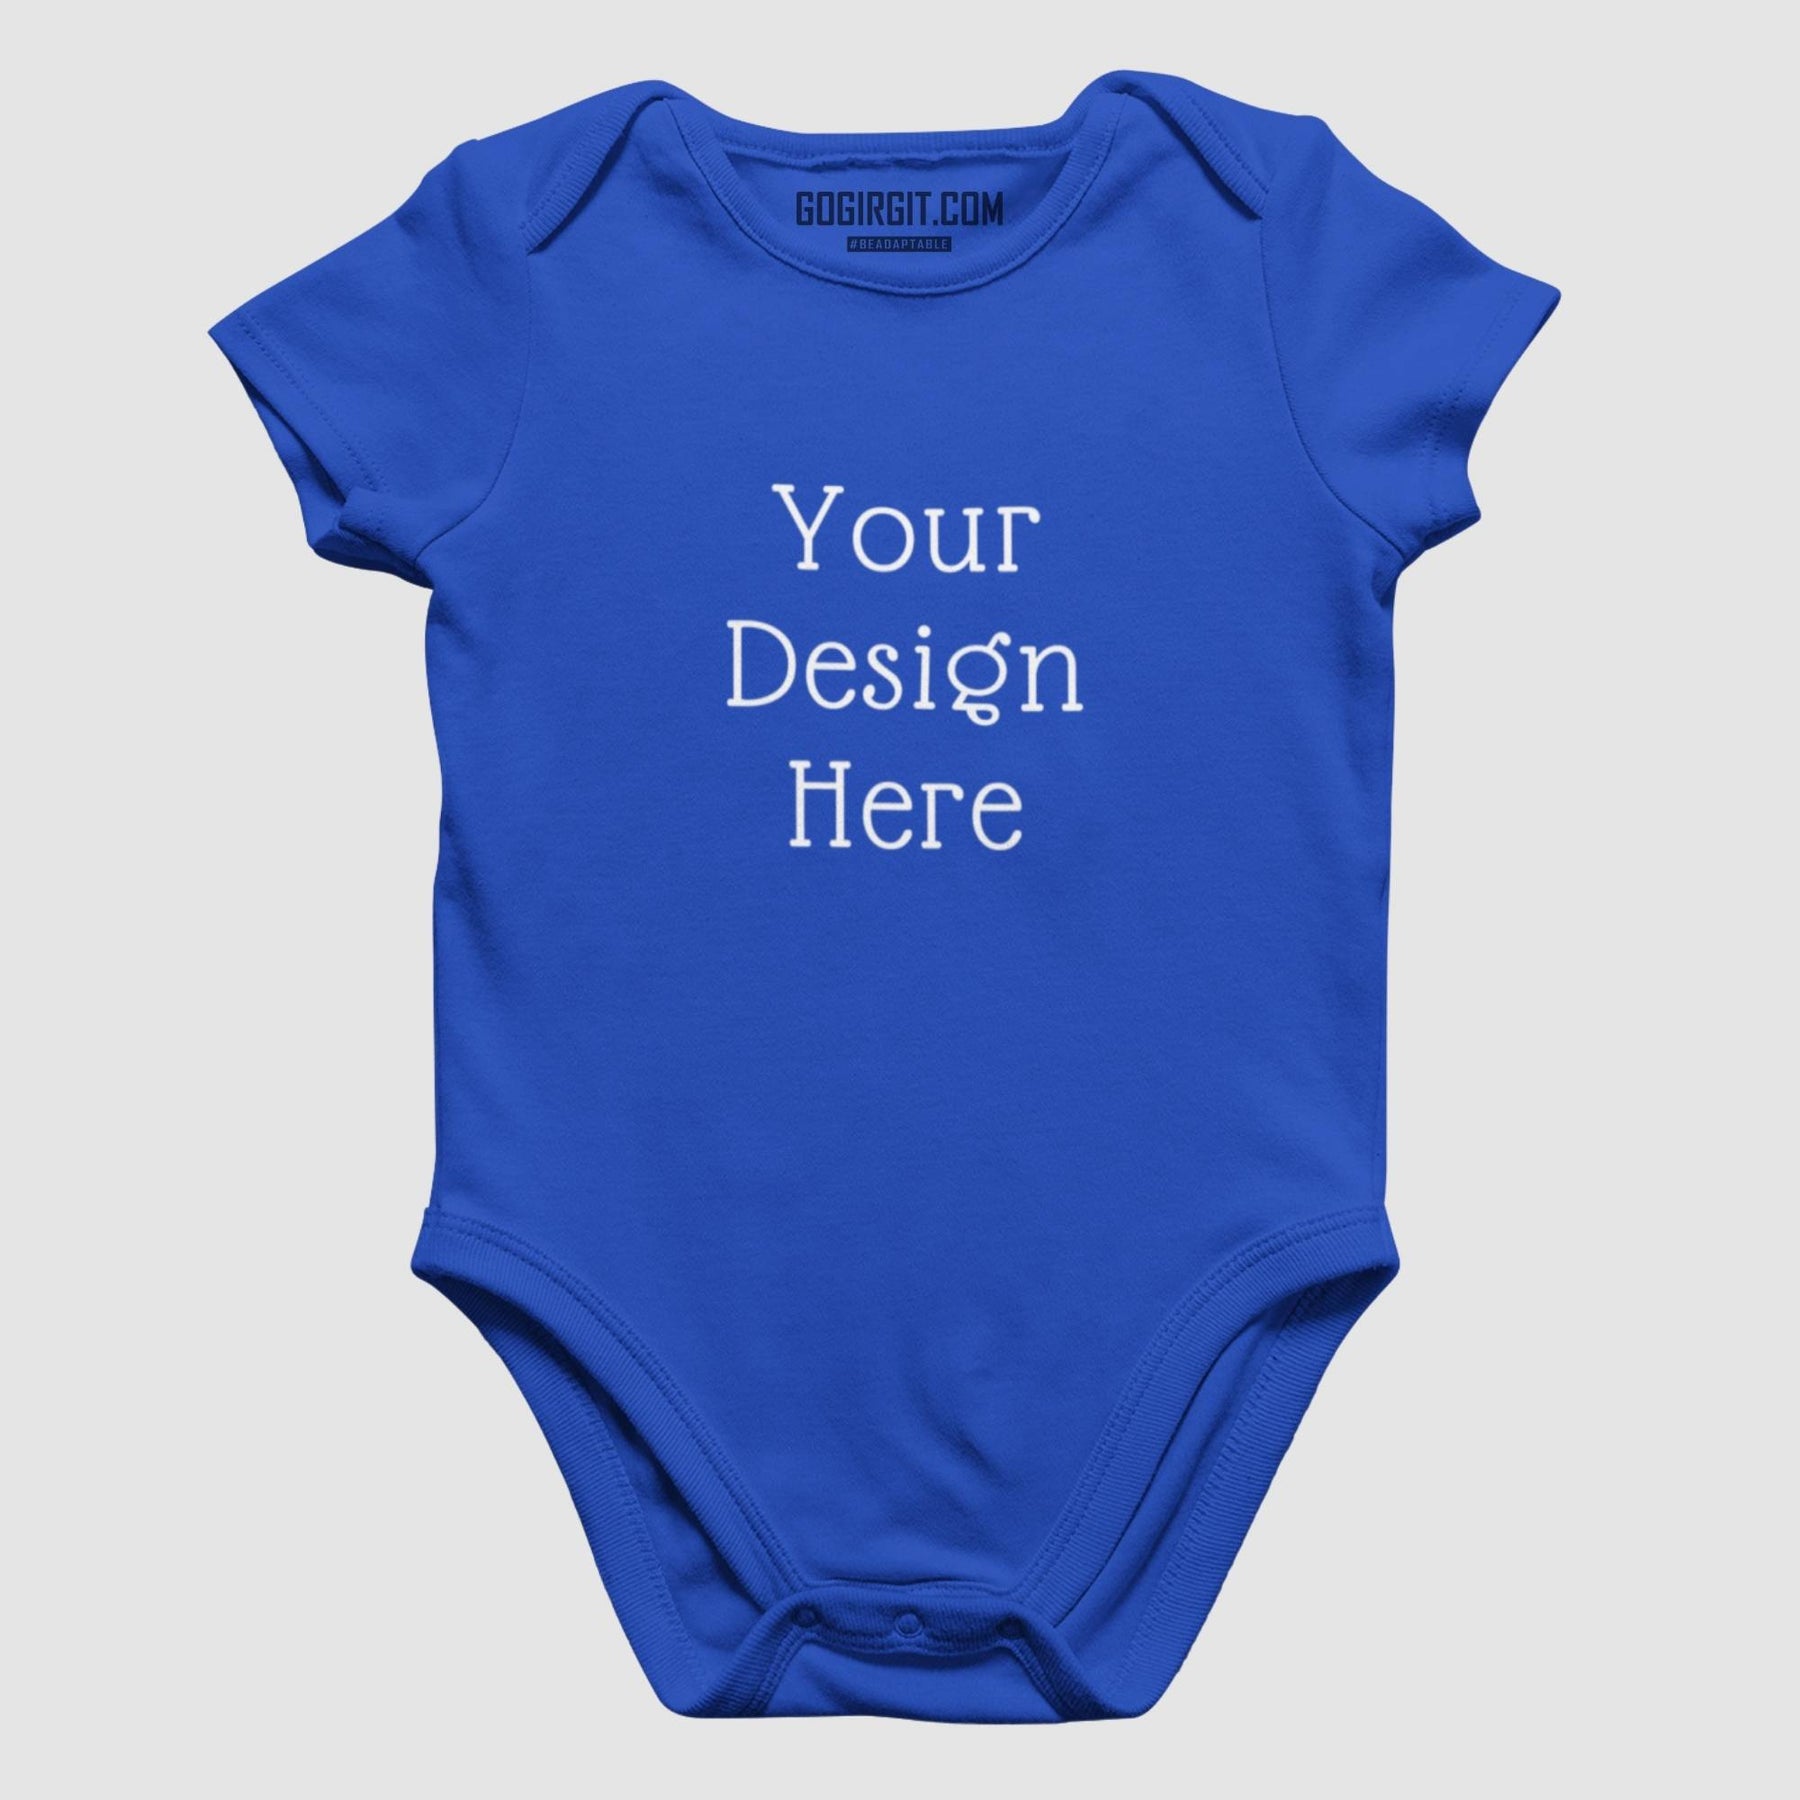 cotton-rompers-for-kids-also-called-onesie-personalised-and-customized-color-royal-blue-gogirgit